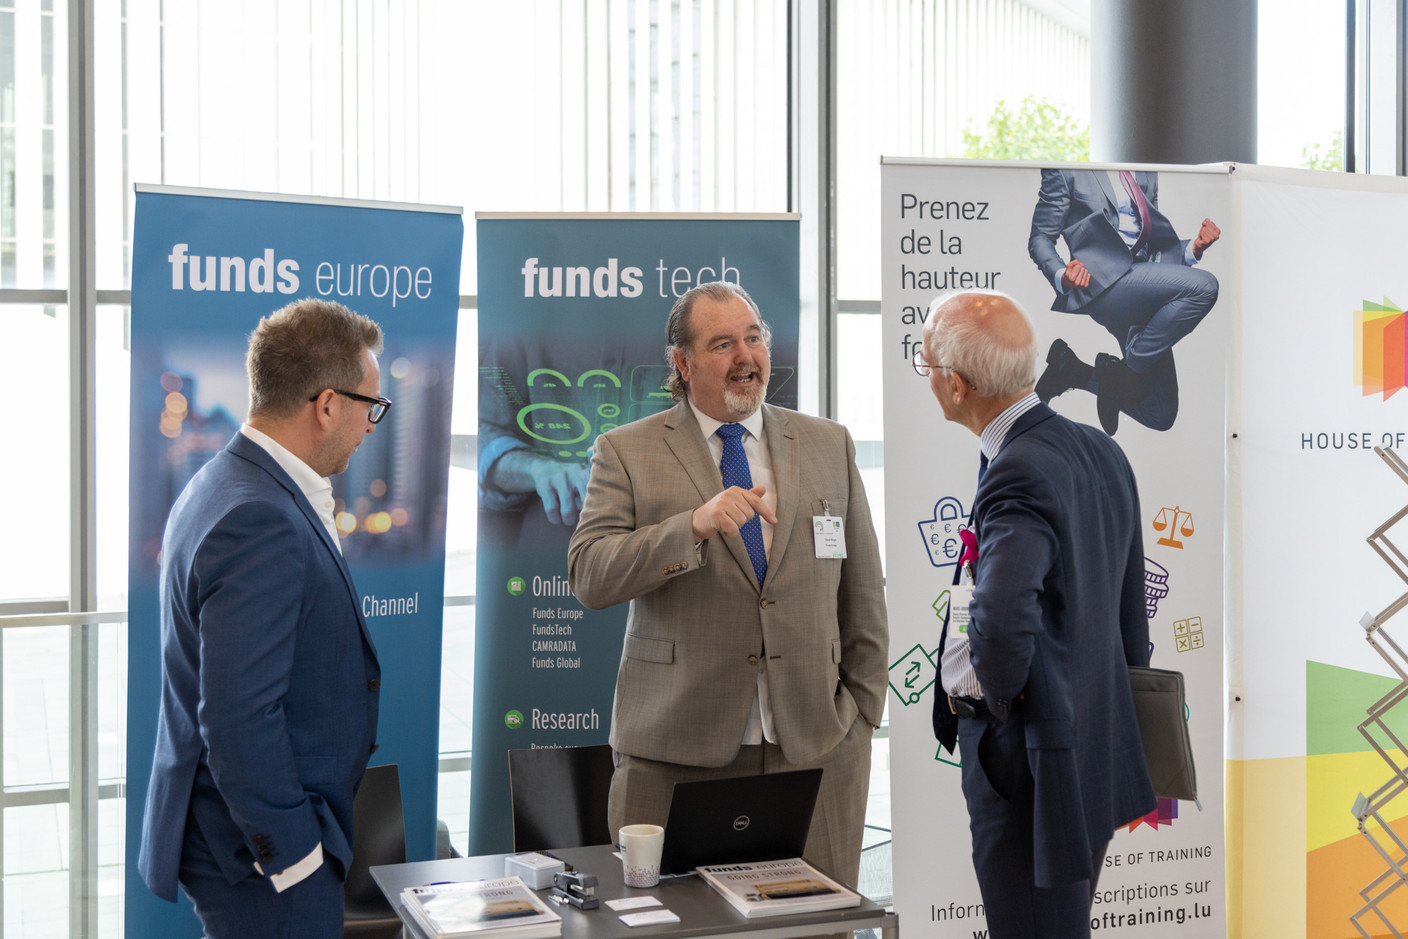 David Wright of Funds Europe is seen speaking with Alfi deputy director general Marc-André Bechet. Photo: Romain Gamba/Maison Moderne